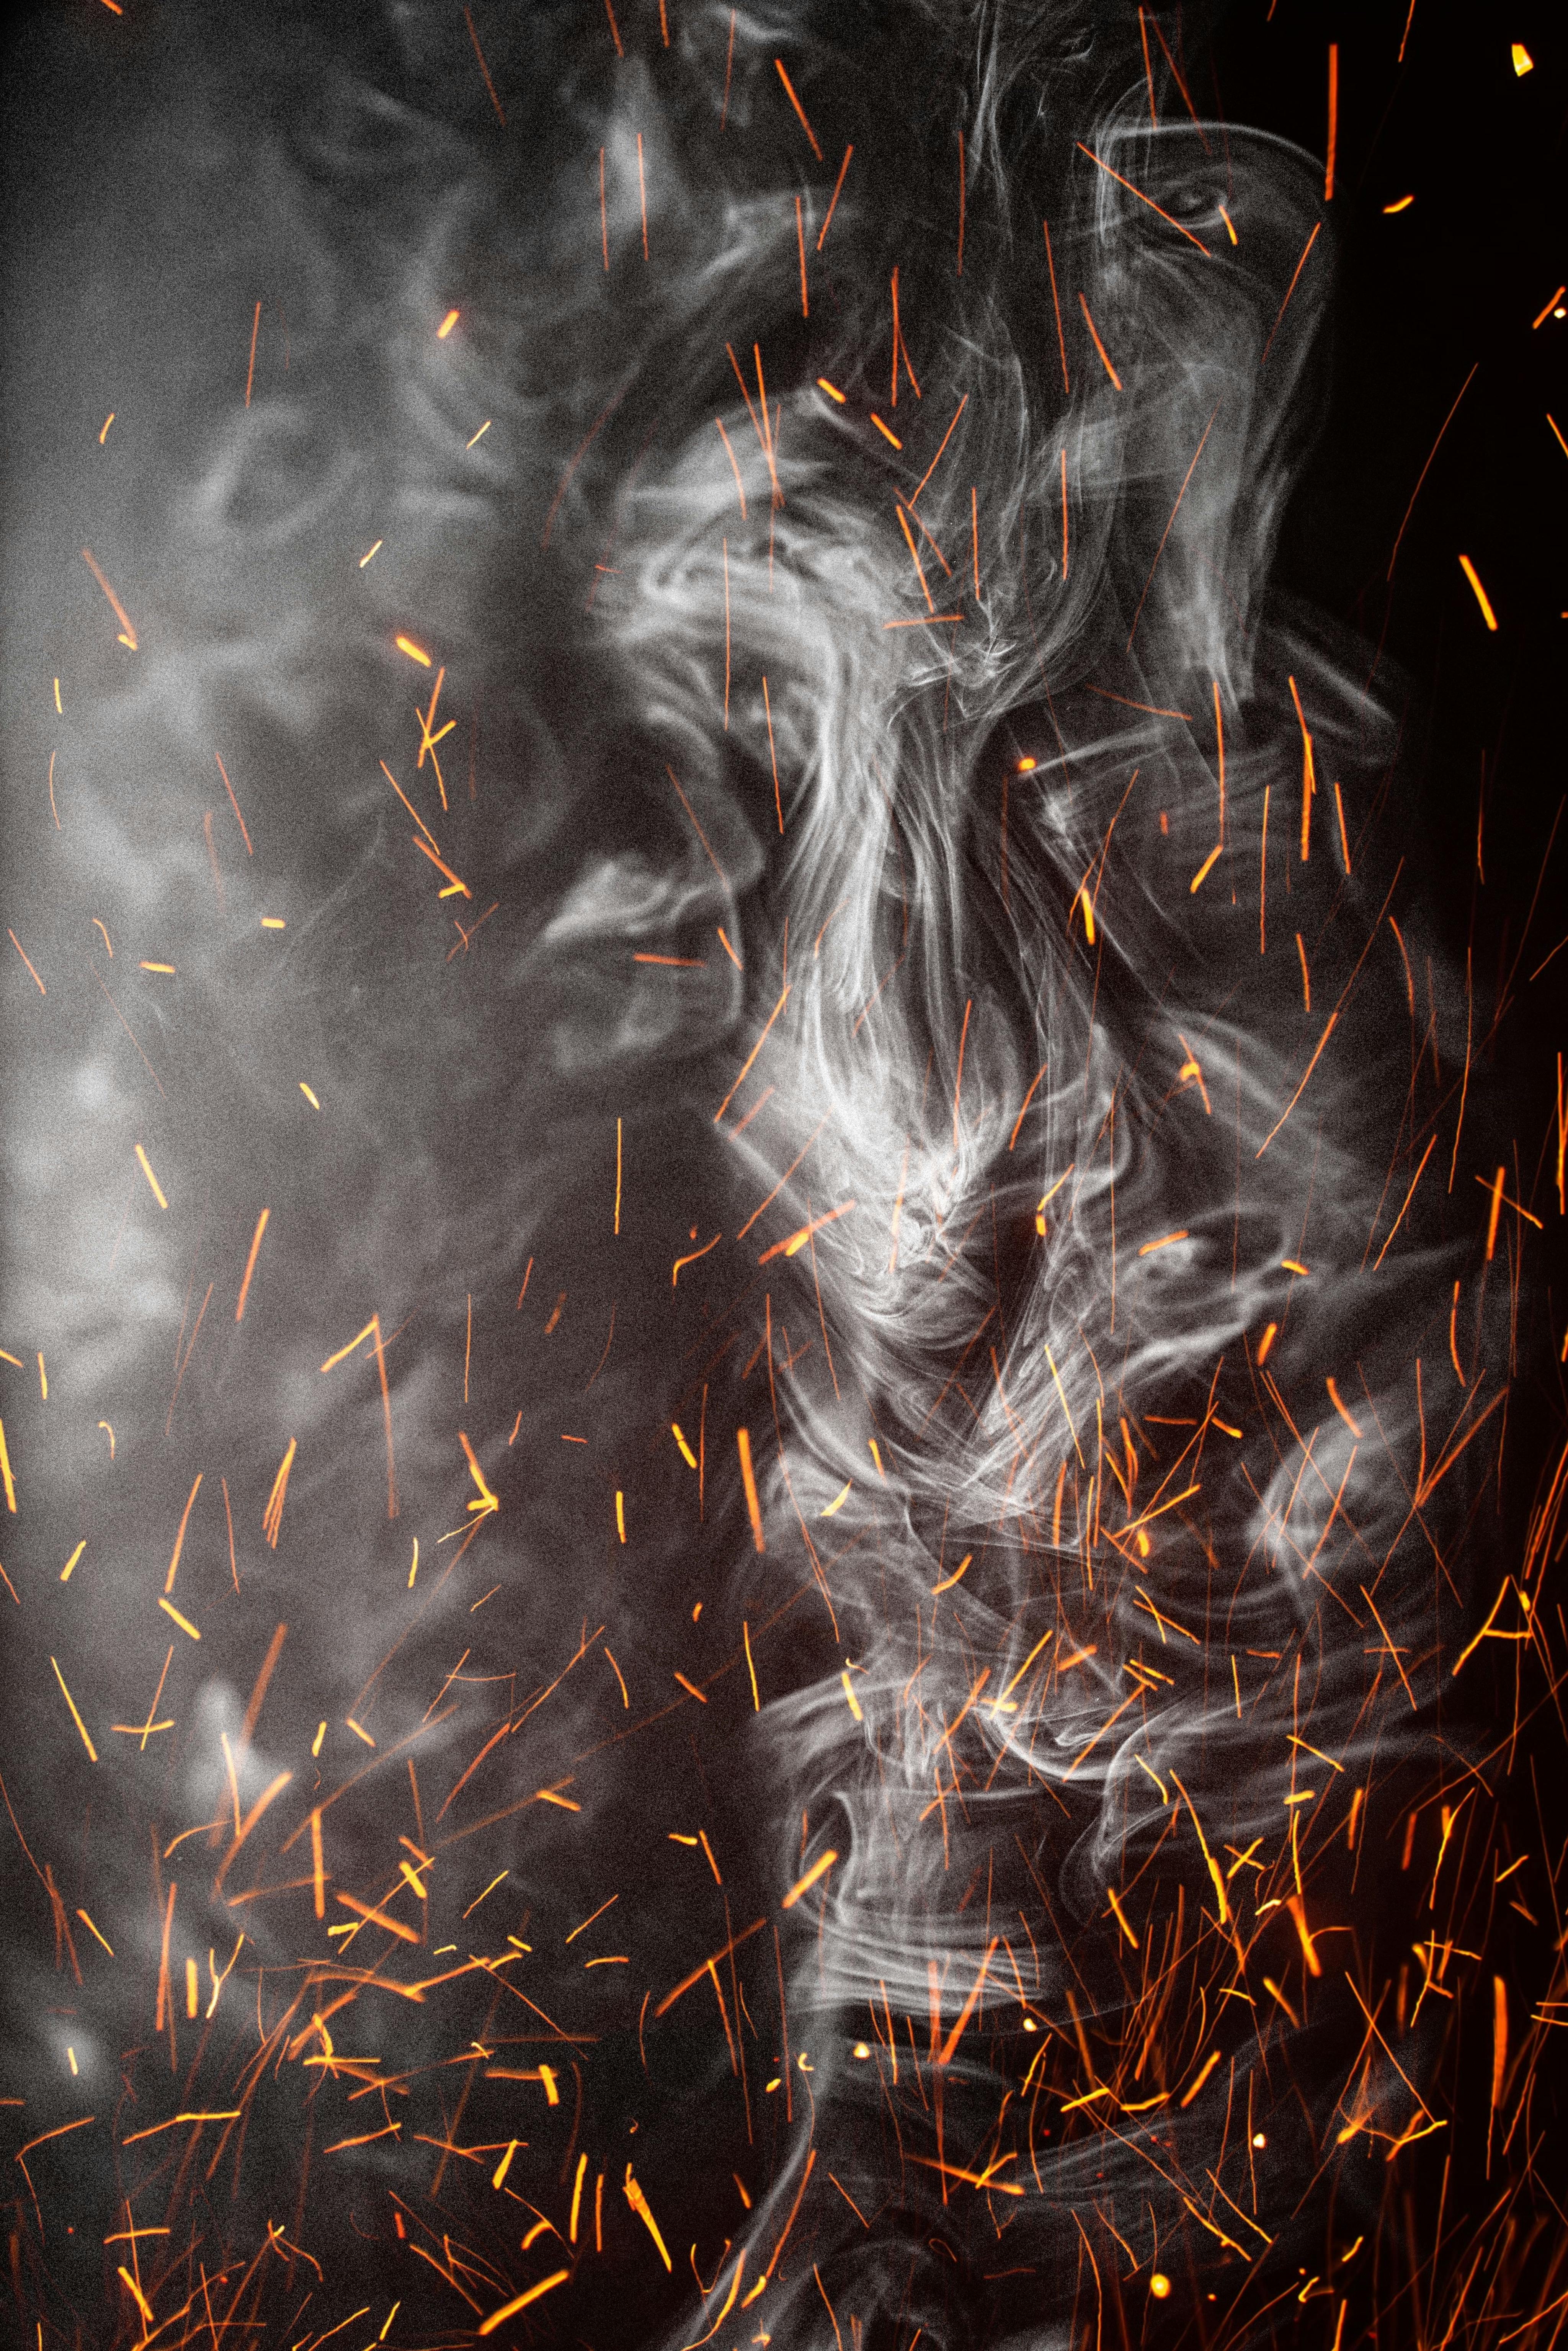 Vibrant Blue Smoke And Sparkles Captivating Abstract Photograph Of